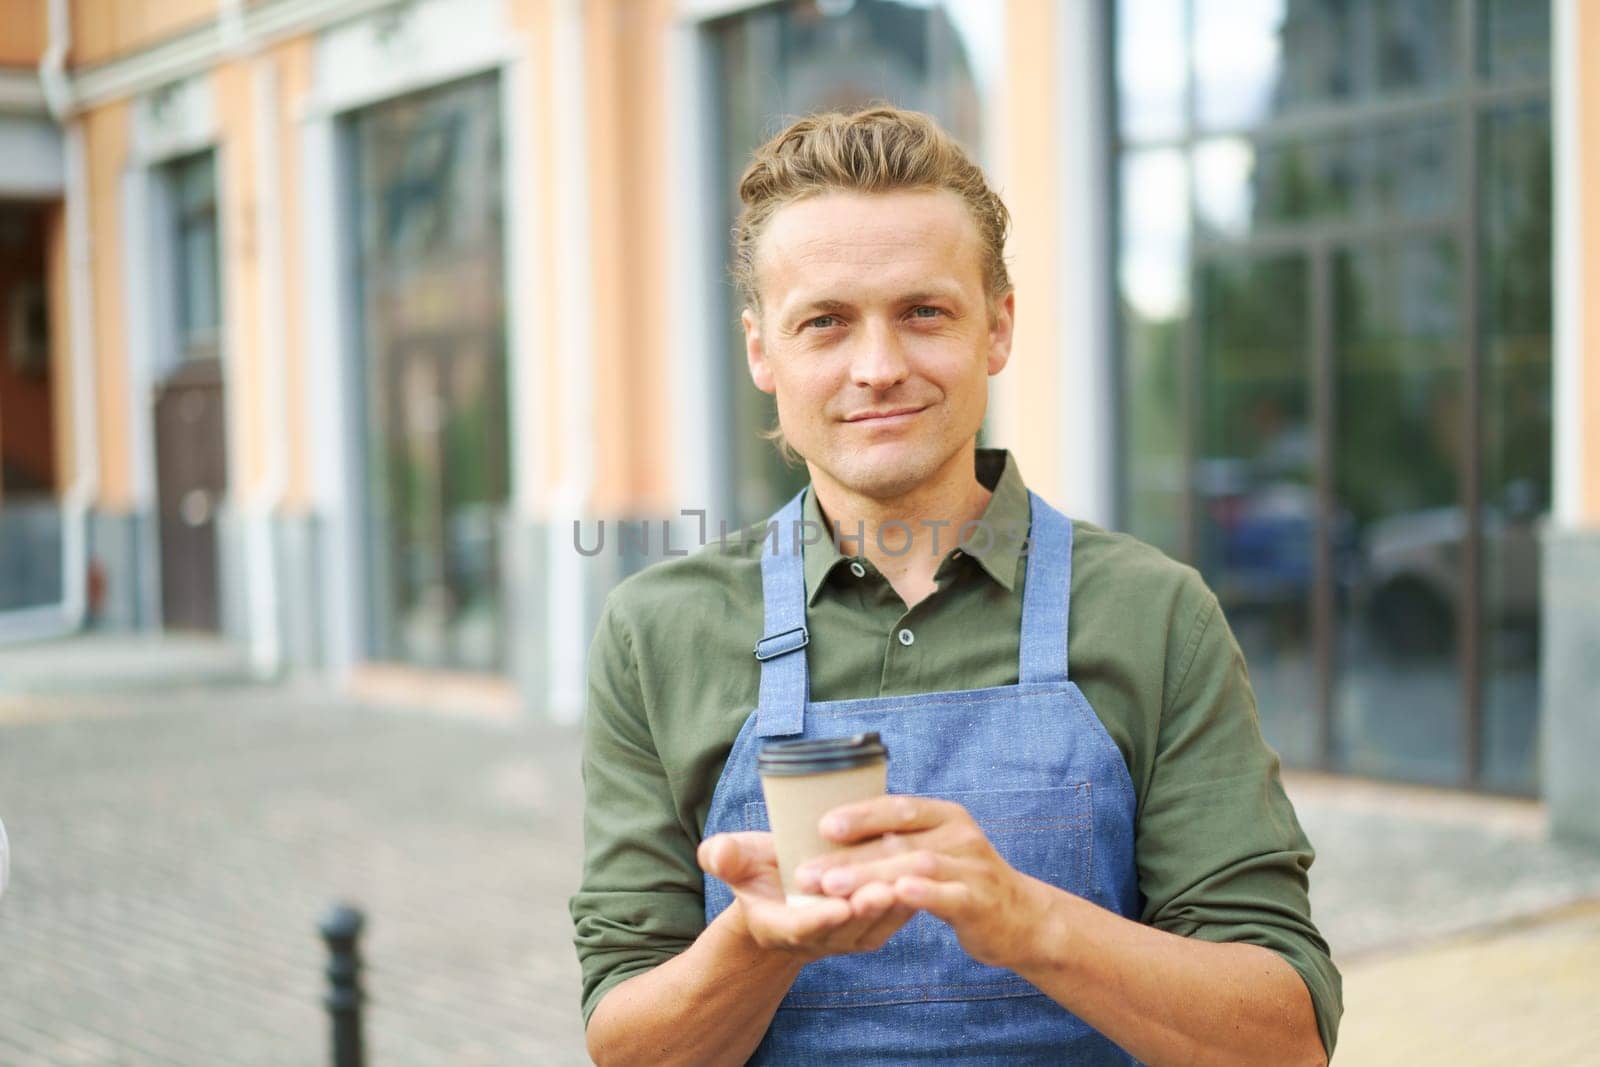 Concept of coffee on the go as waiter offers hot paper cup of coffee to client on street. Urban hospitality and the convenience of enjoying a freshly brewed coffee while on the move. . High quality photo